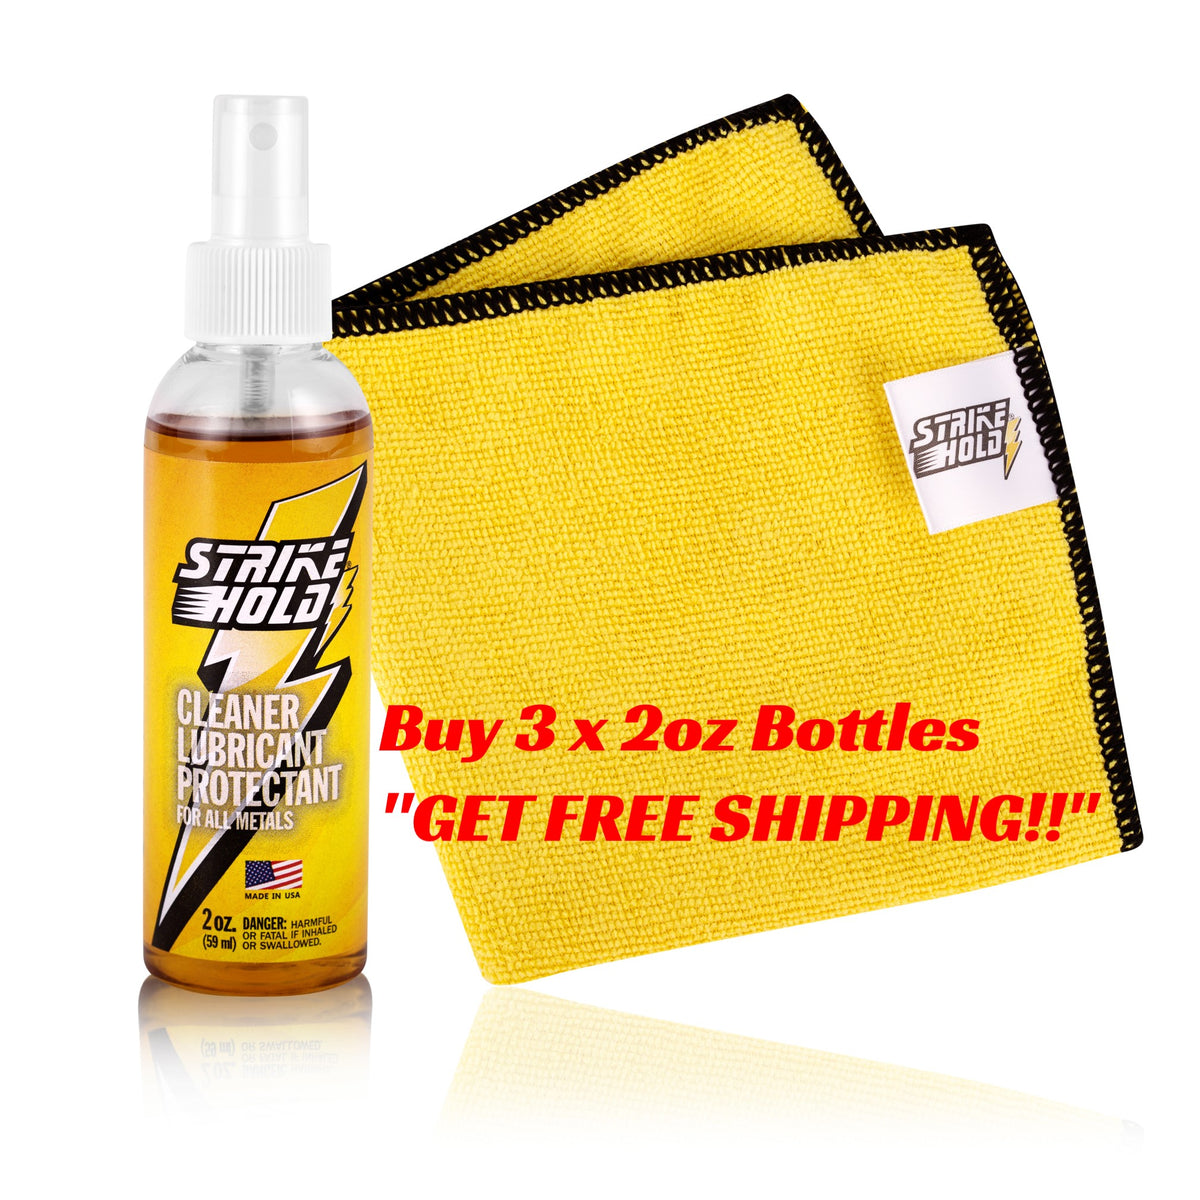 STRIKE HOLD: The BEST Cleaner, LUBRICANT, and PROTECTANT for your